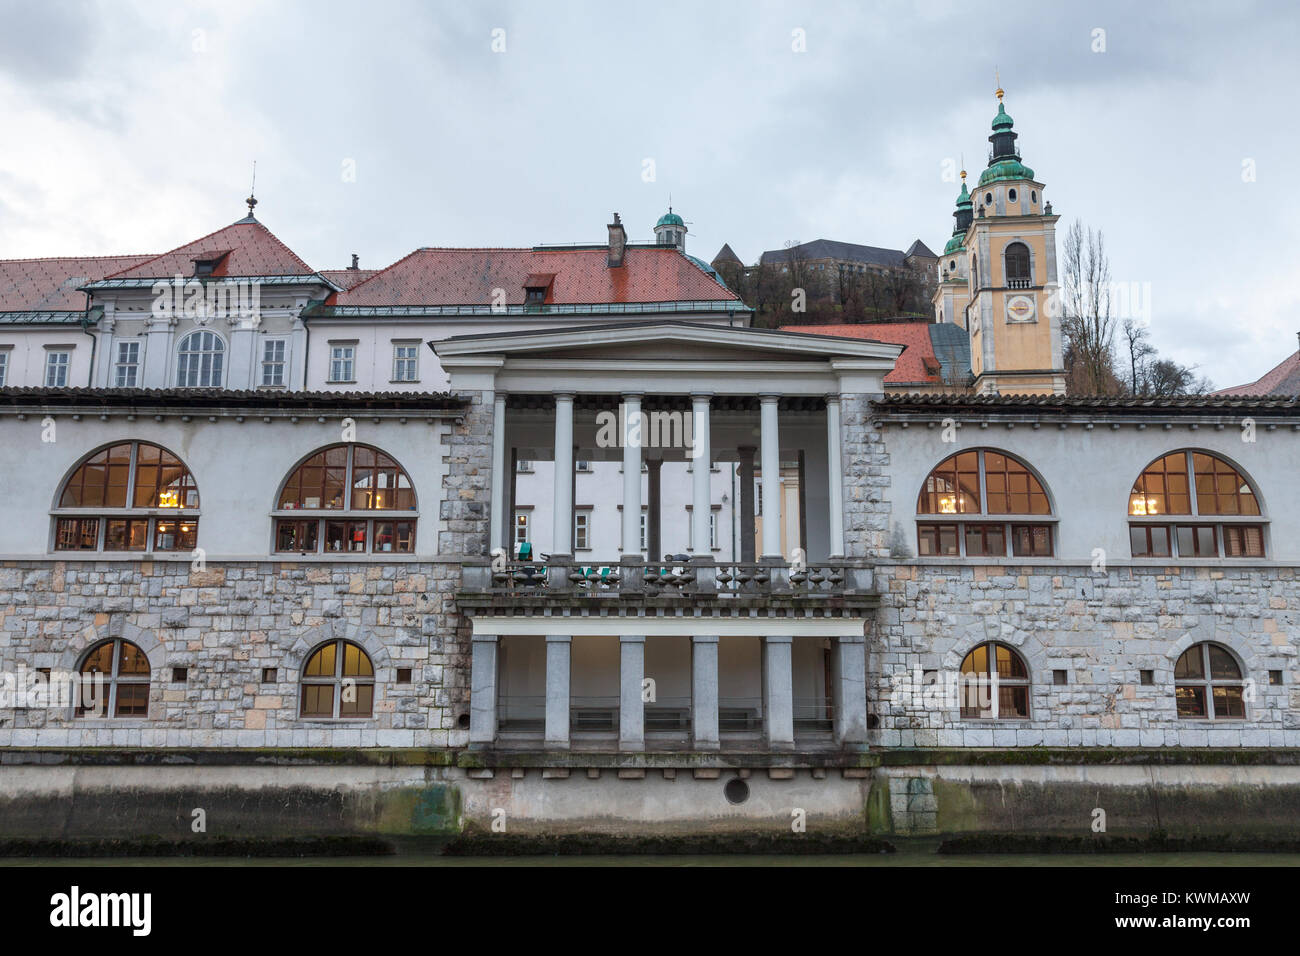 Central Market of Ljubljana, capital city of Slovenia, taken during a cloudy rainy day, with the Ljubljanica river on foreground. This part of the old Stock Photo